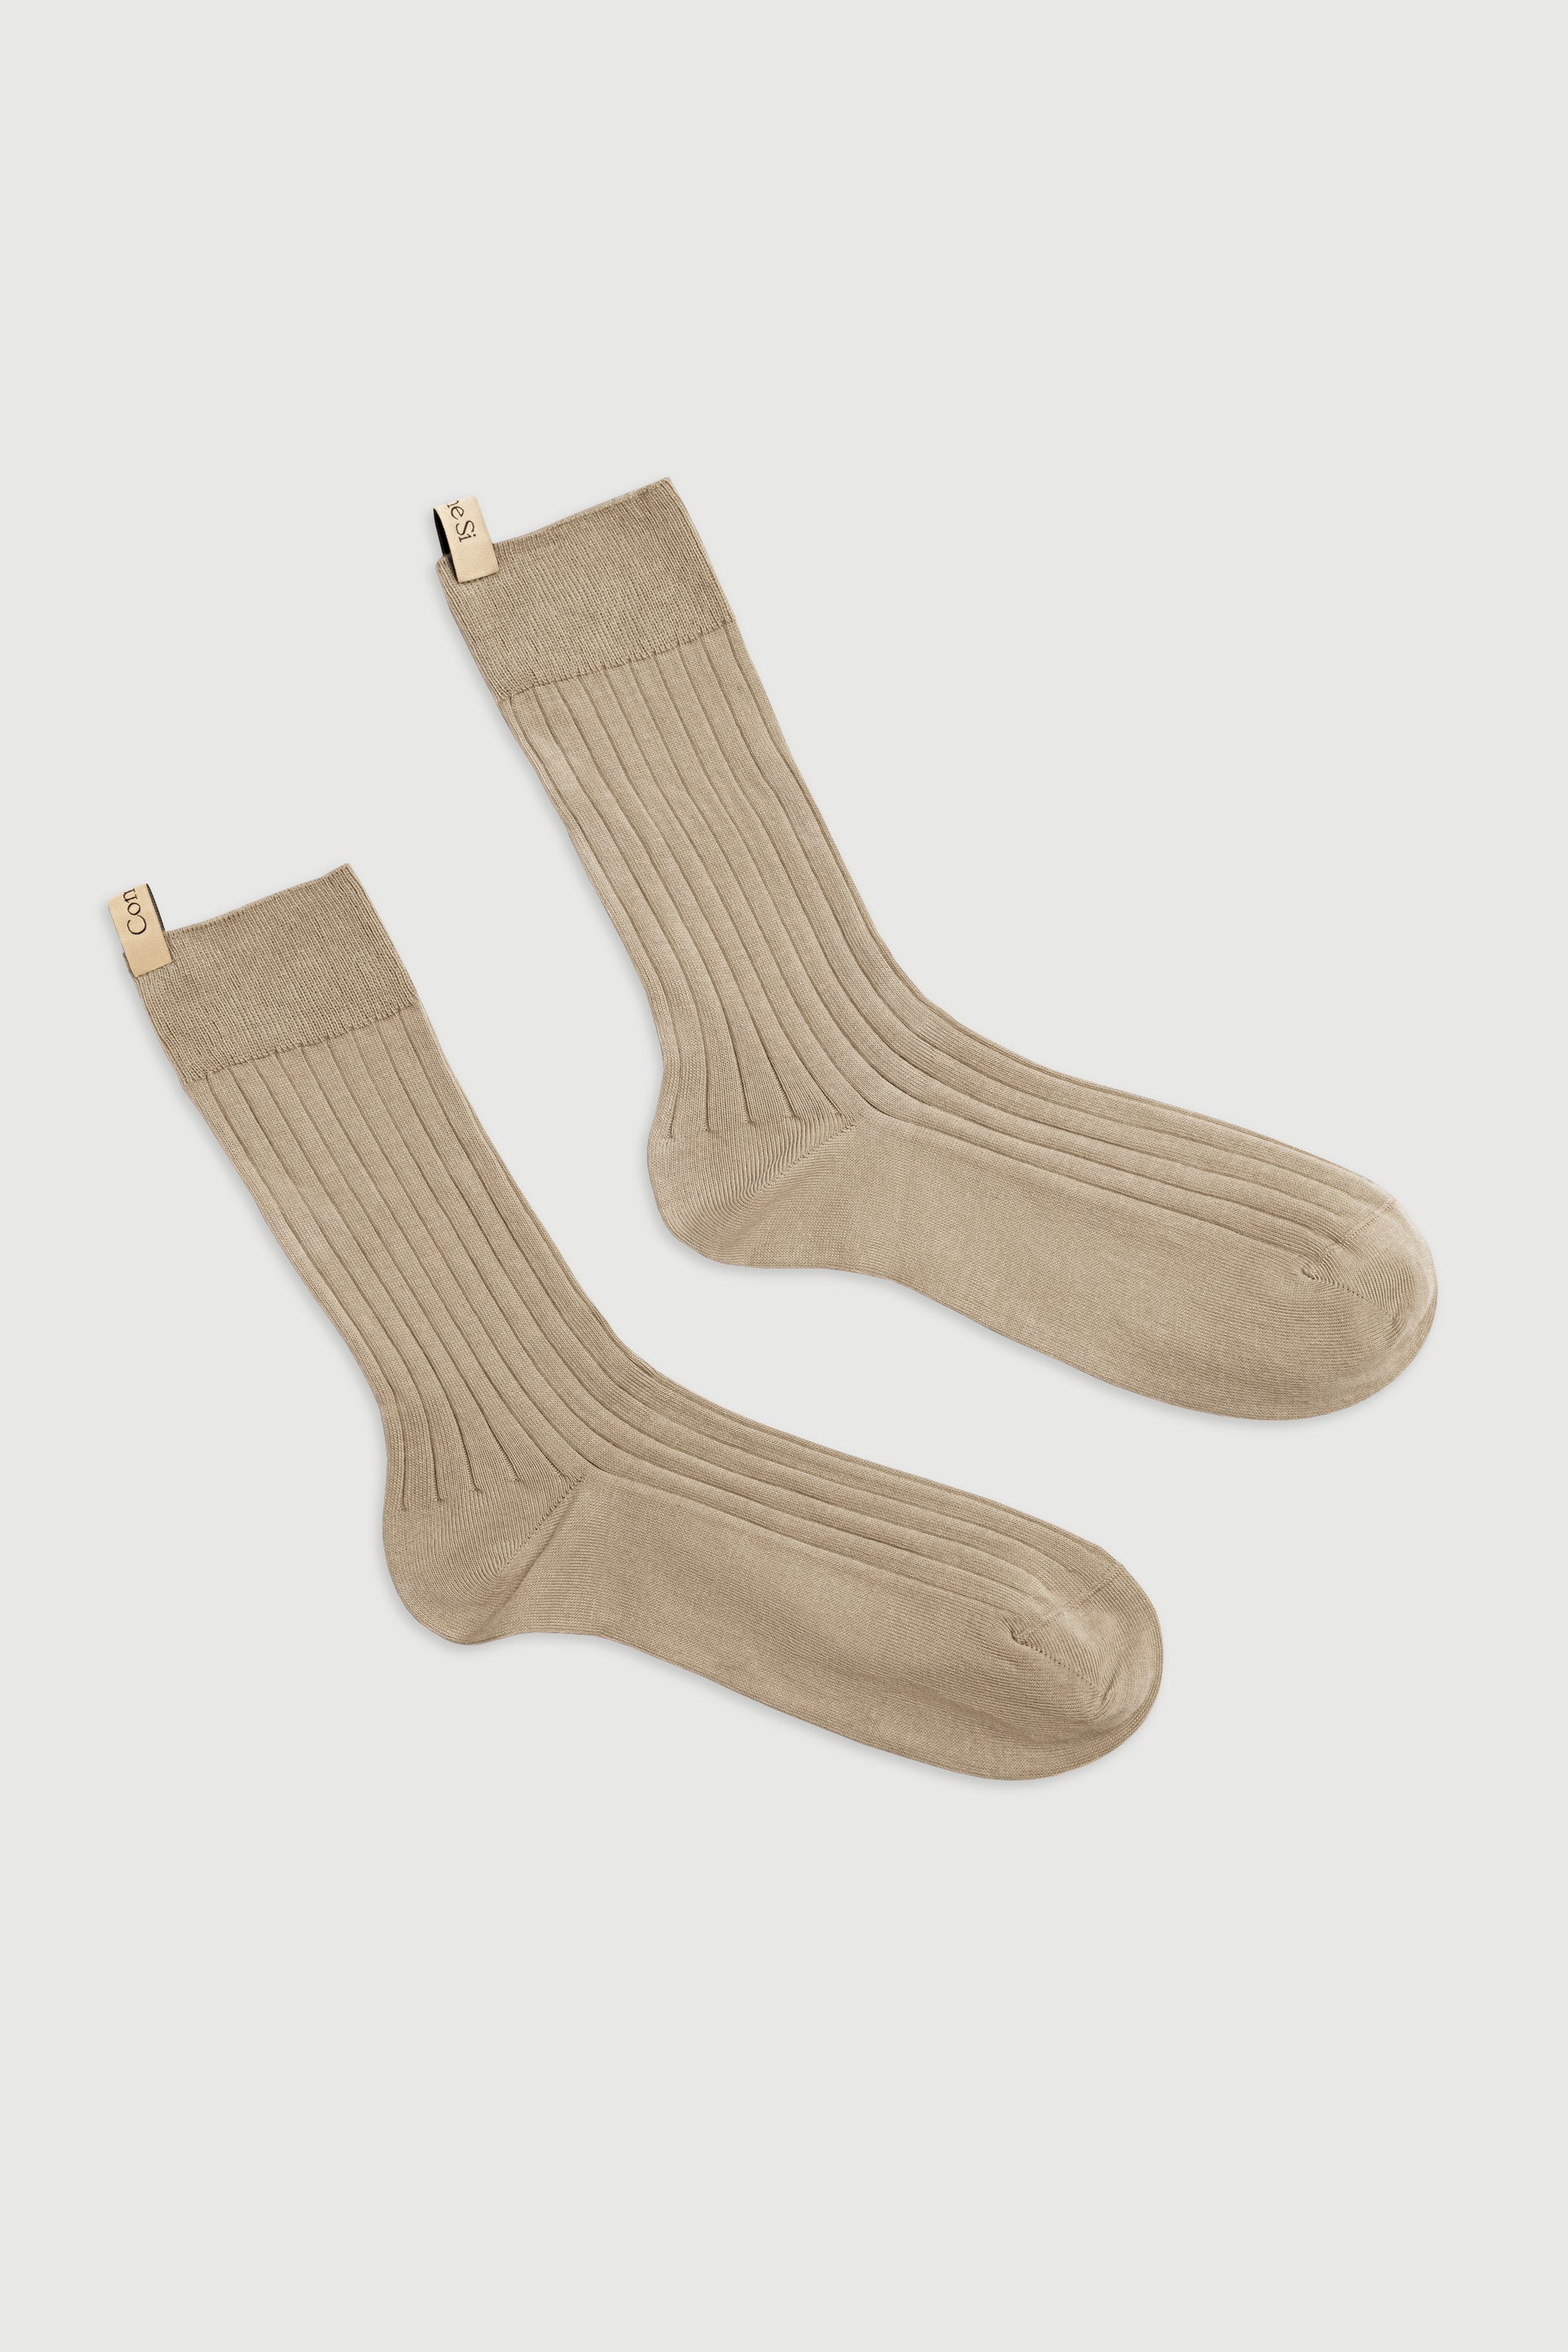 The Yves Sock in Khaki, Egyptian cotton sock by Comme Si